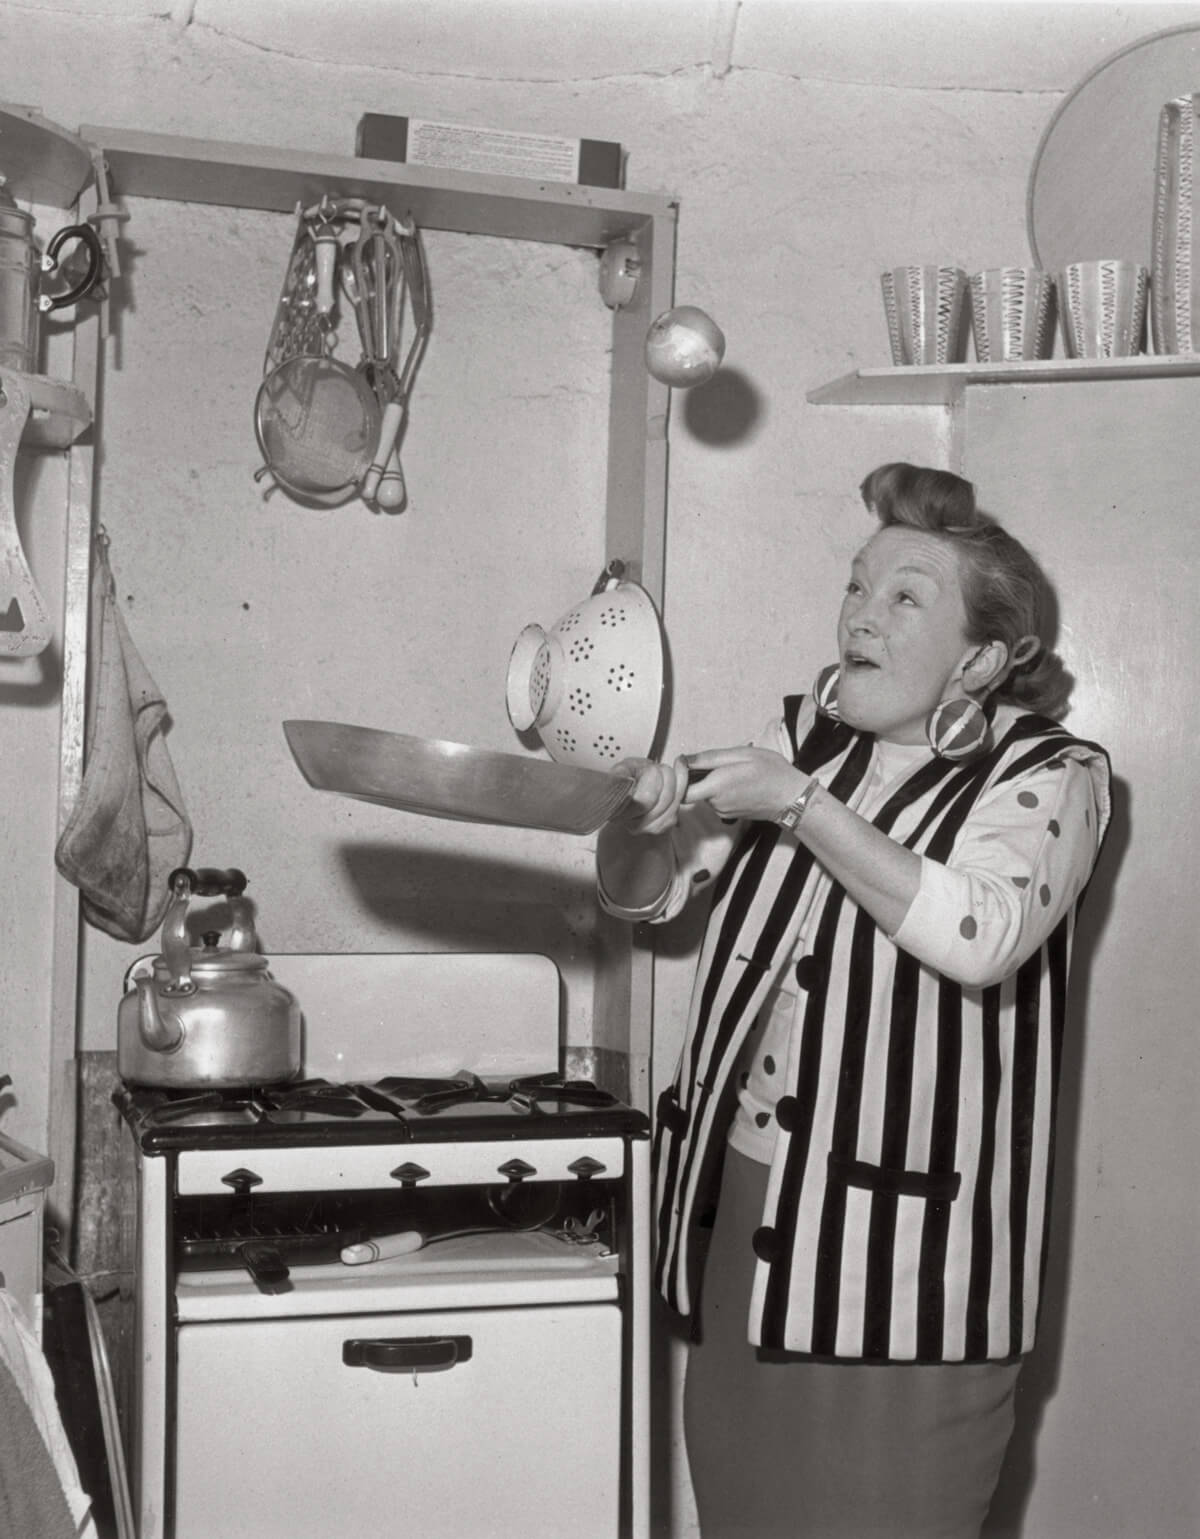 A photograph by Chris Ware from 25 June nineteen fifty six captioned, “British comedienne Beryl Reid tossing the Spanish onion on a Monday, as opposed to tossing the pancake on Pancake Tuesday.”